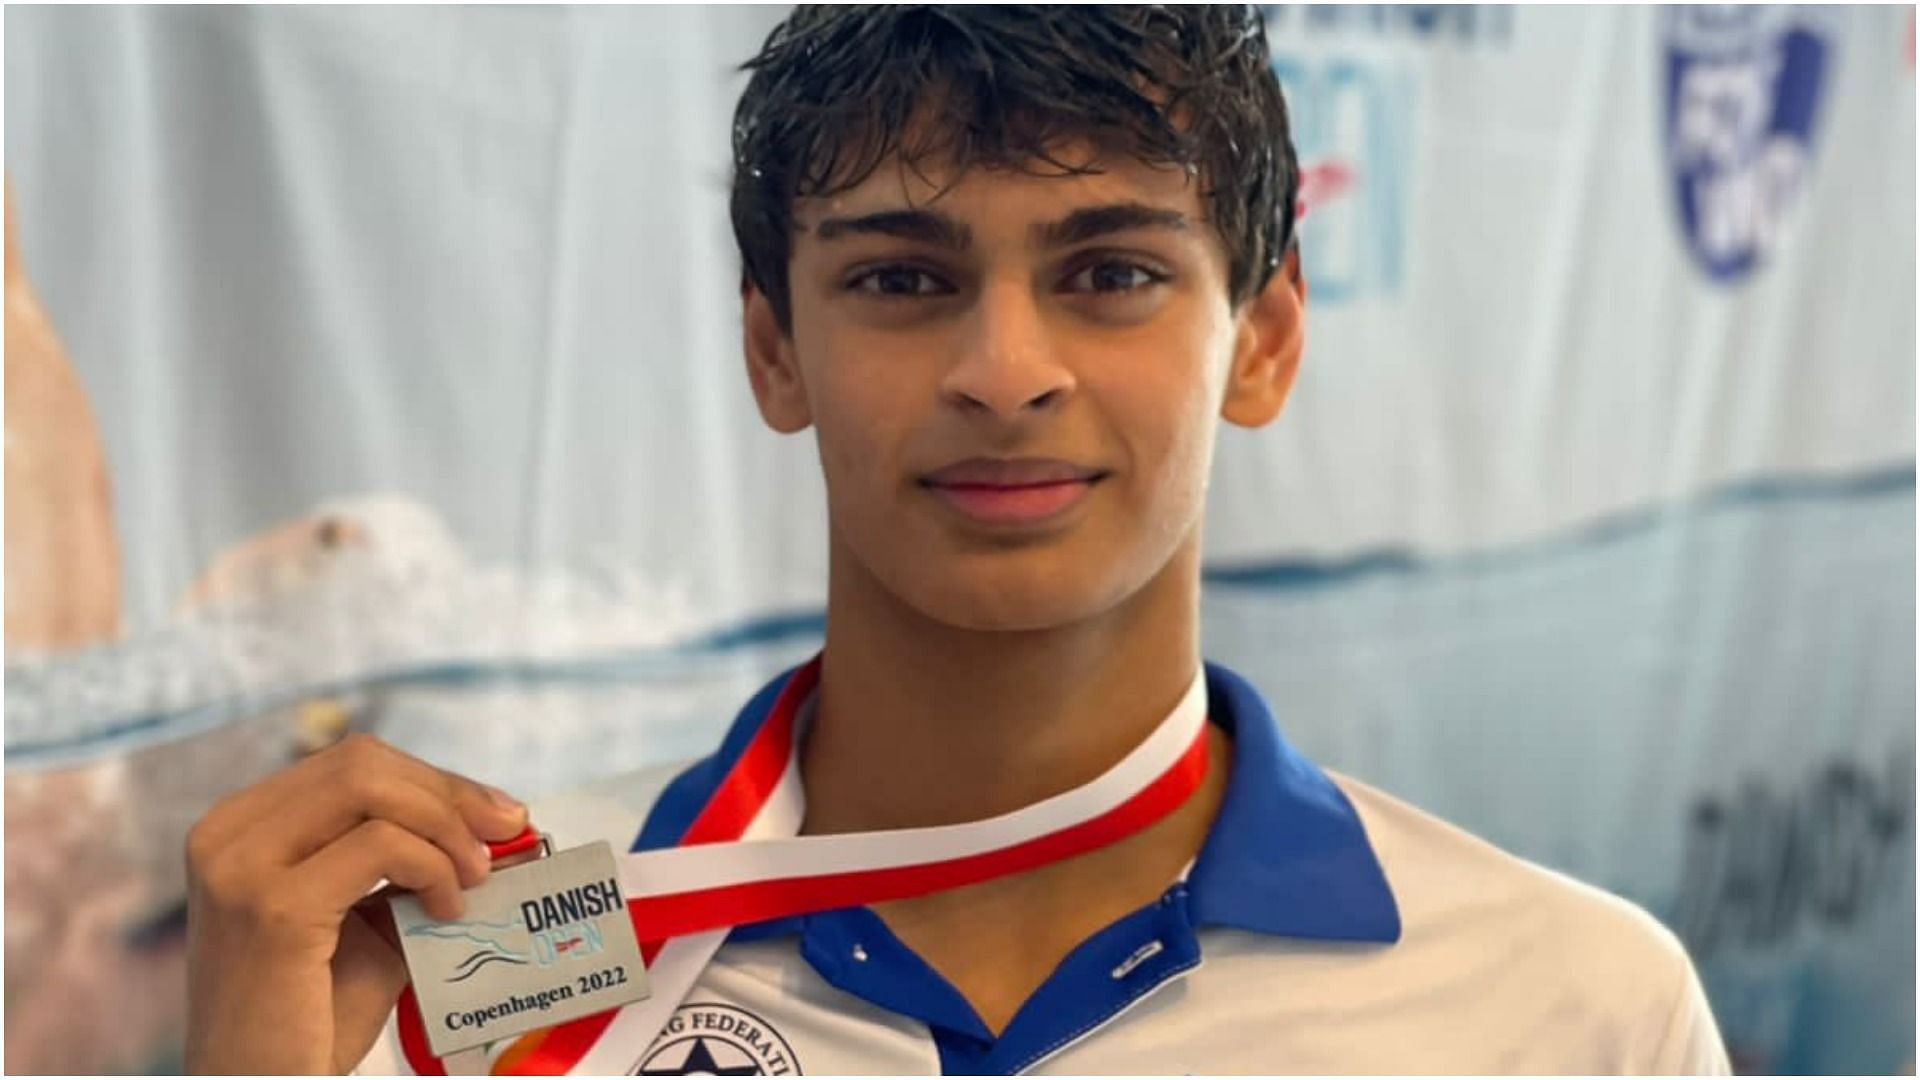 Vedaant Madhavan at Danish Open 2022 (Pic Credit: Swimming Federation of India)